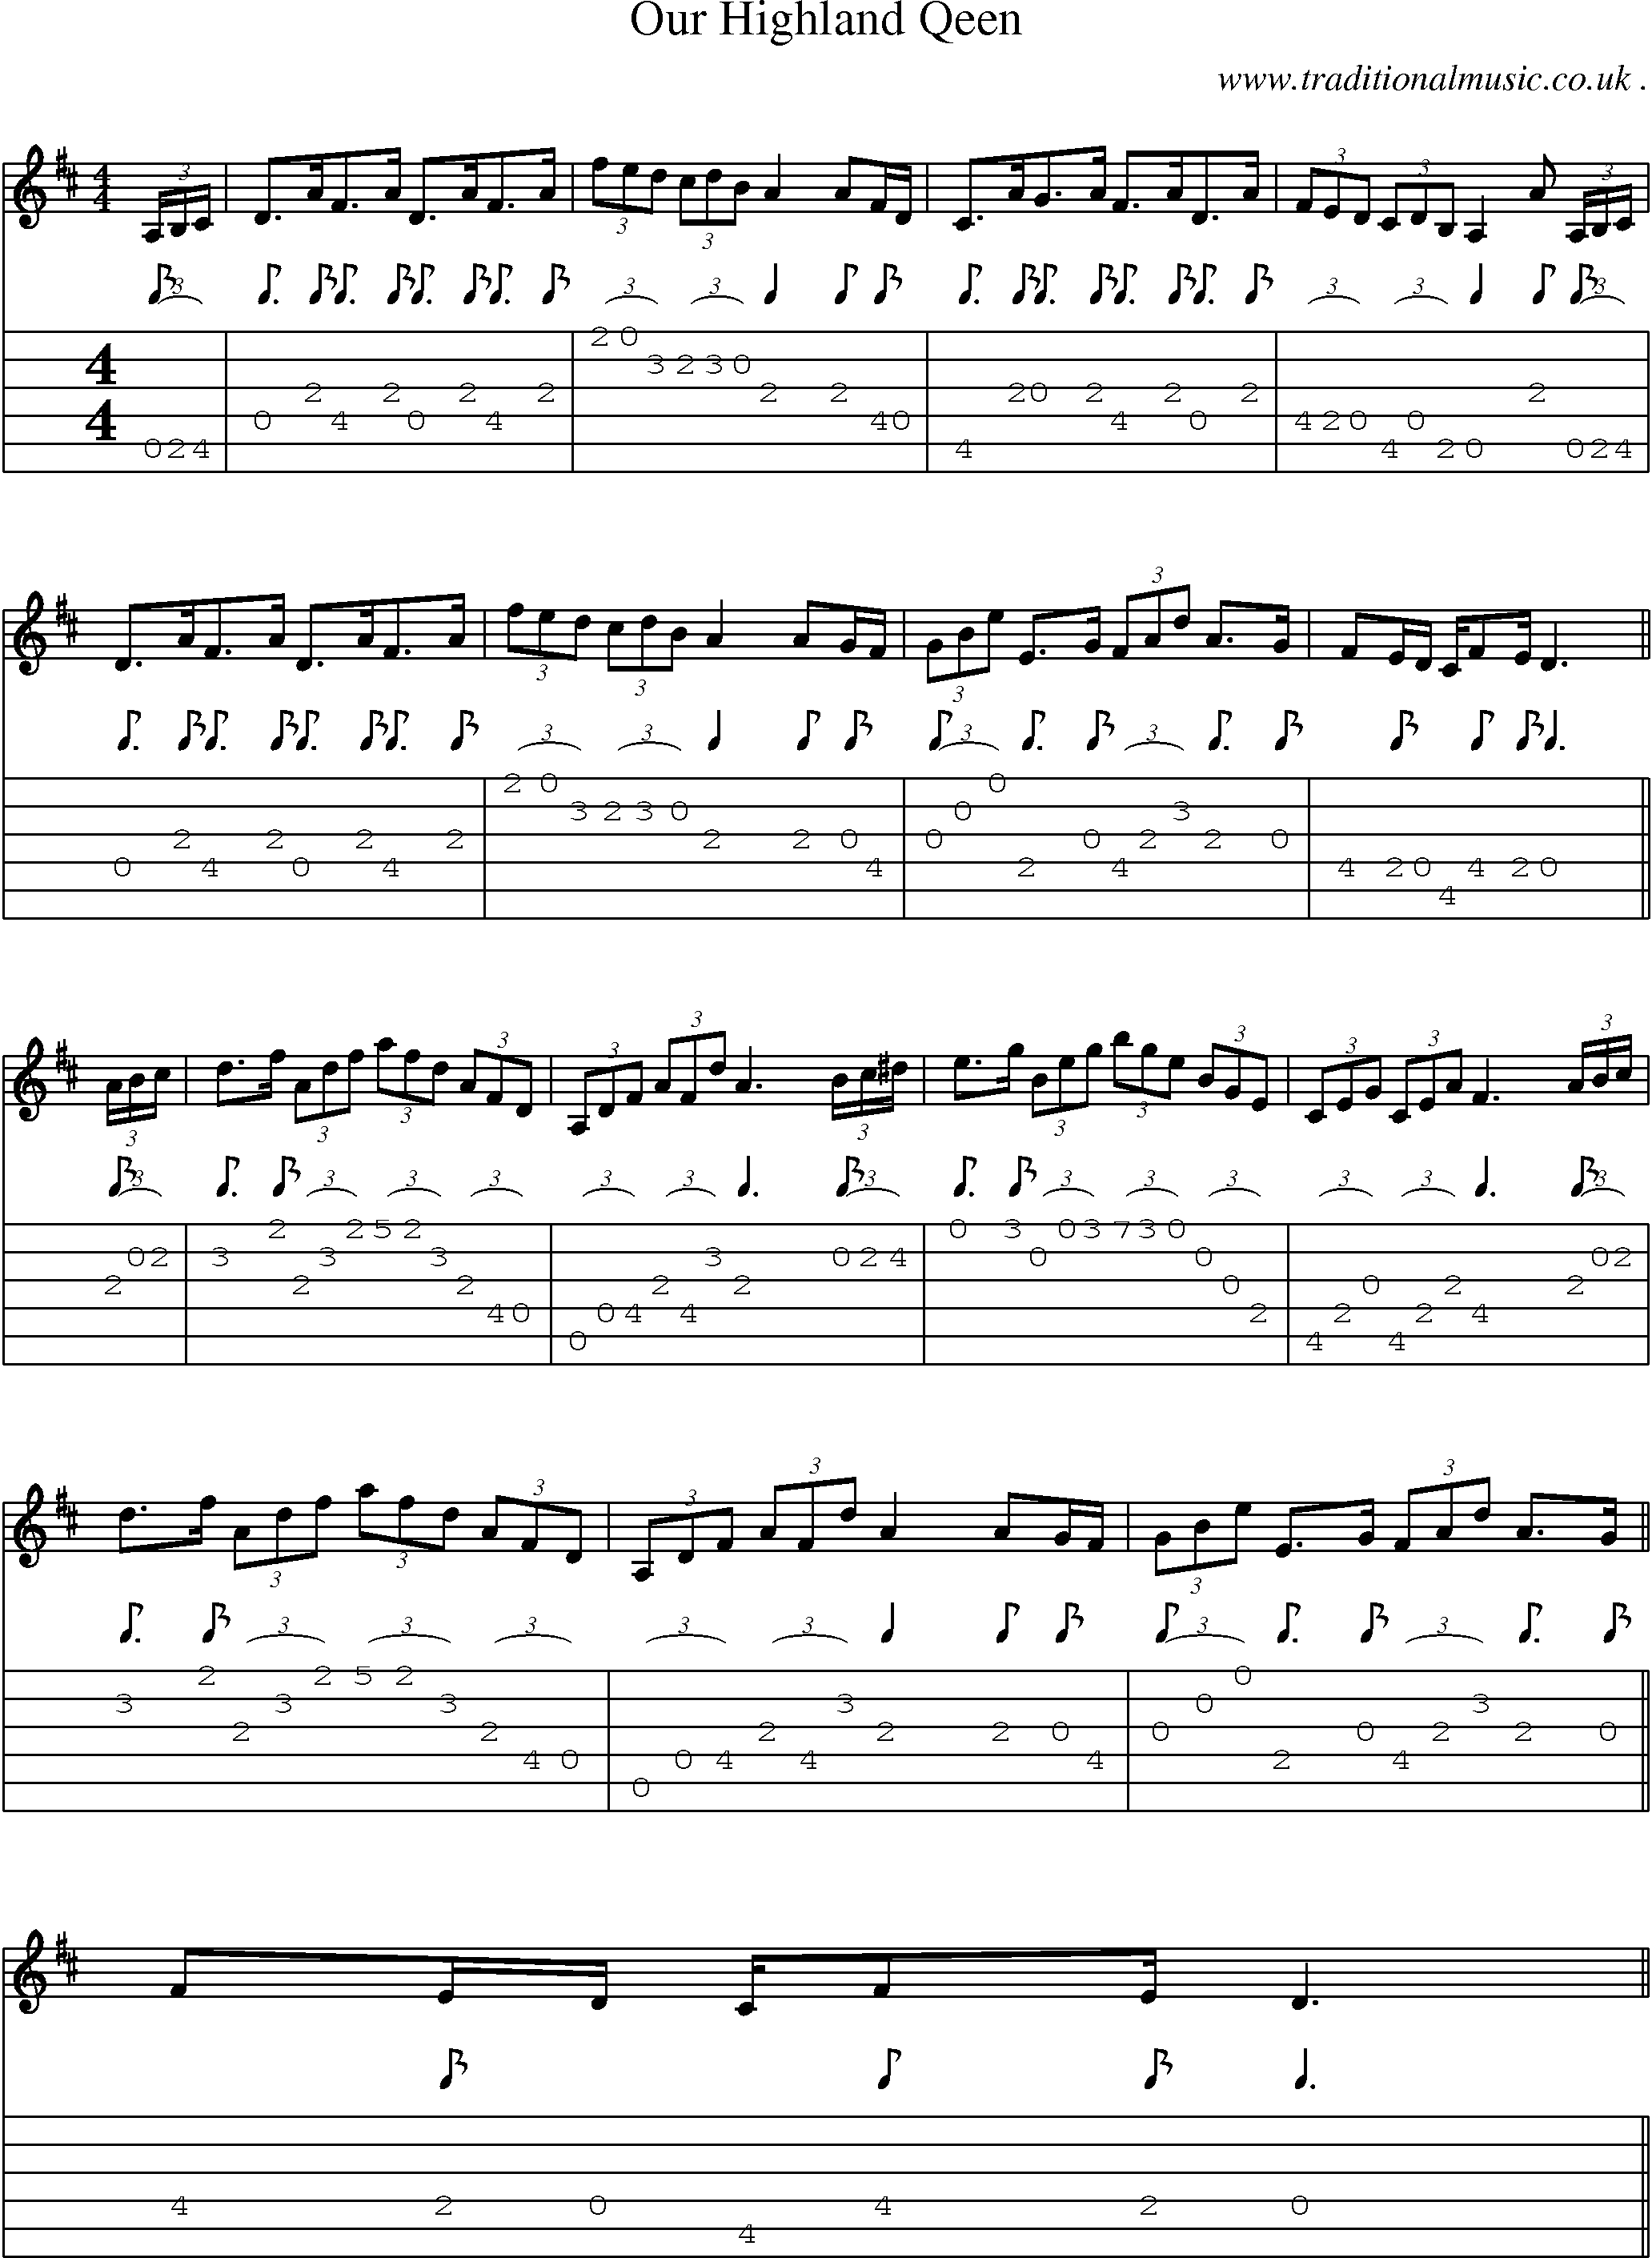 Sheet-Music and Guitar Tabs for Our Highland Qeen